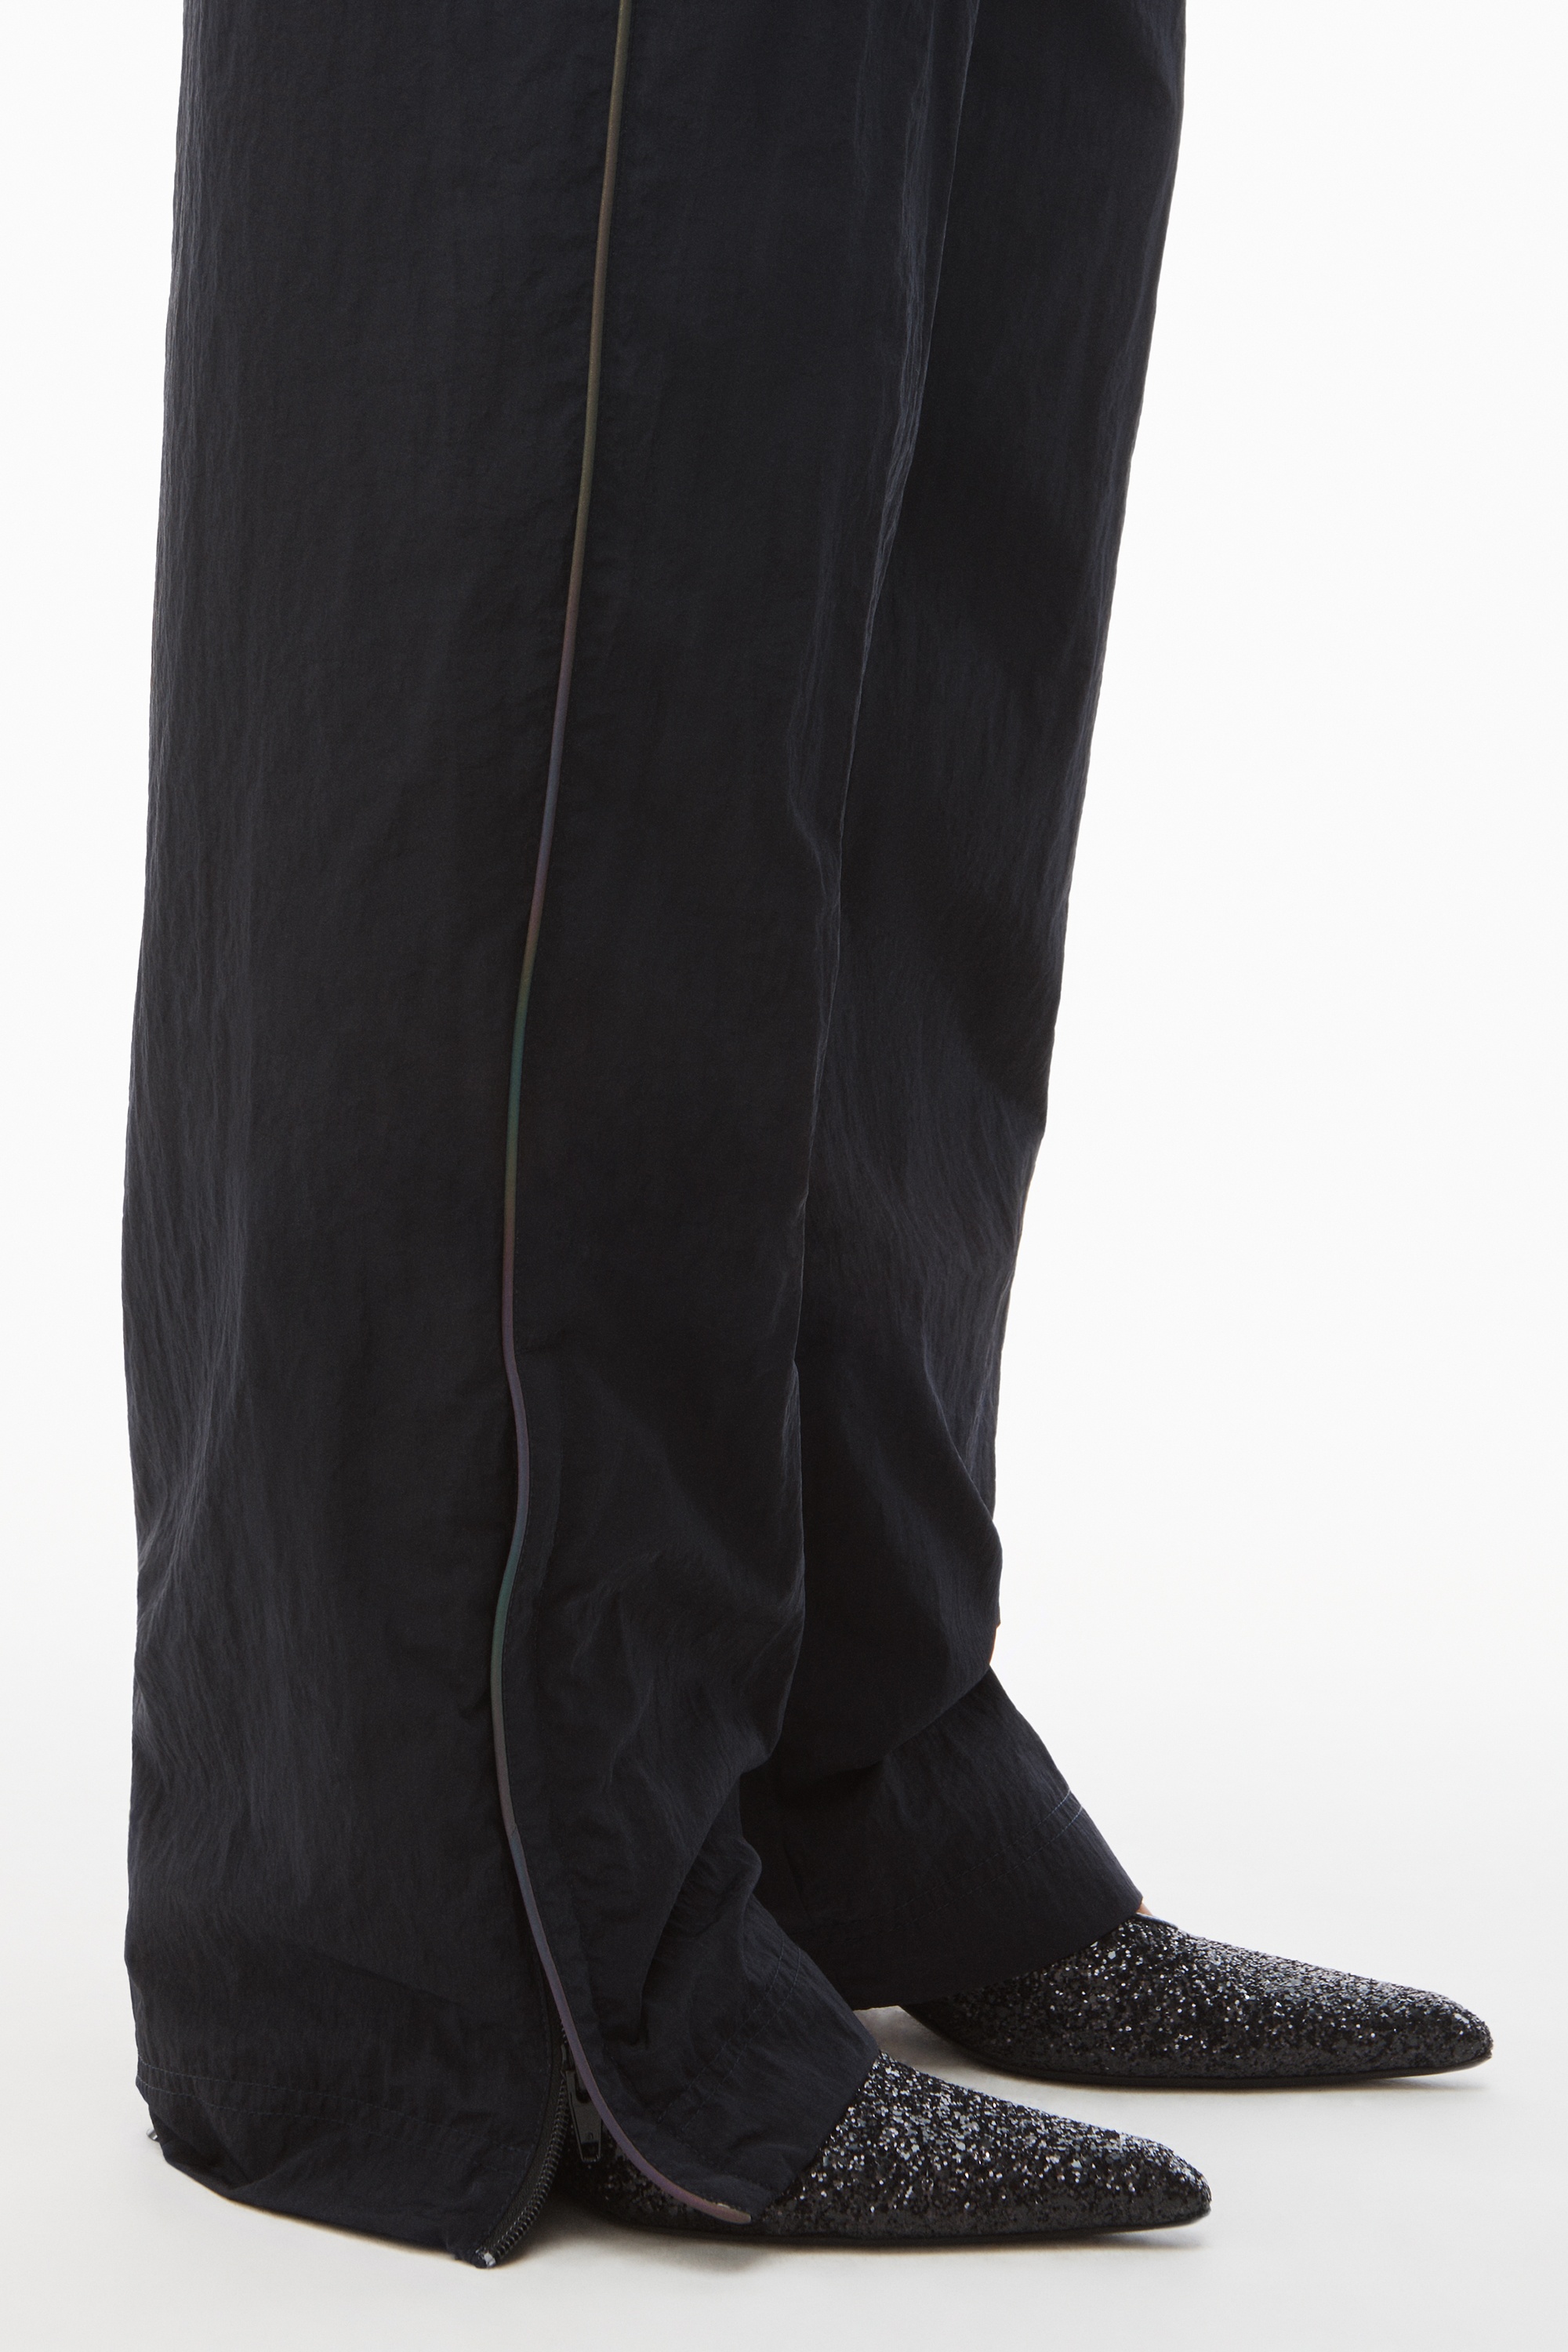 TRACK PANT IN HEAVY WASHED NYLON - 6